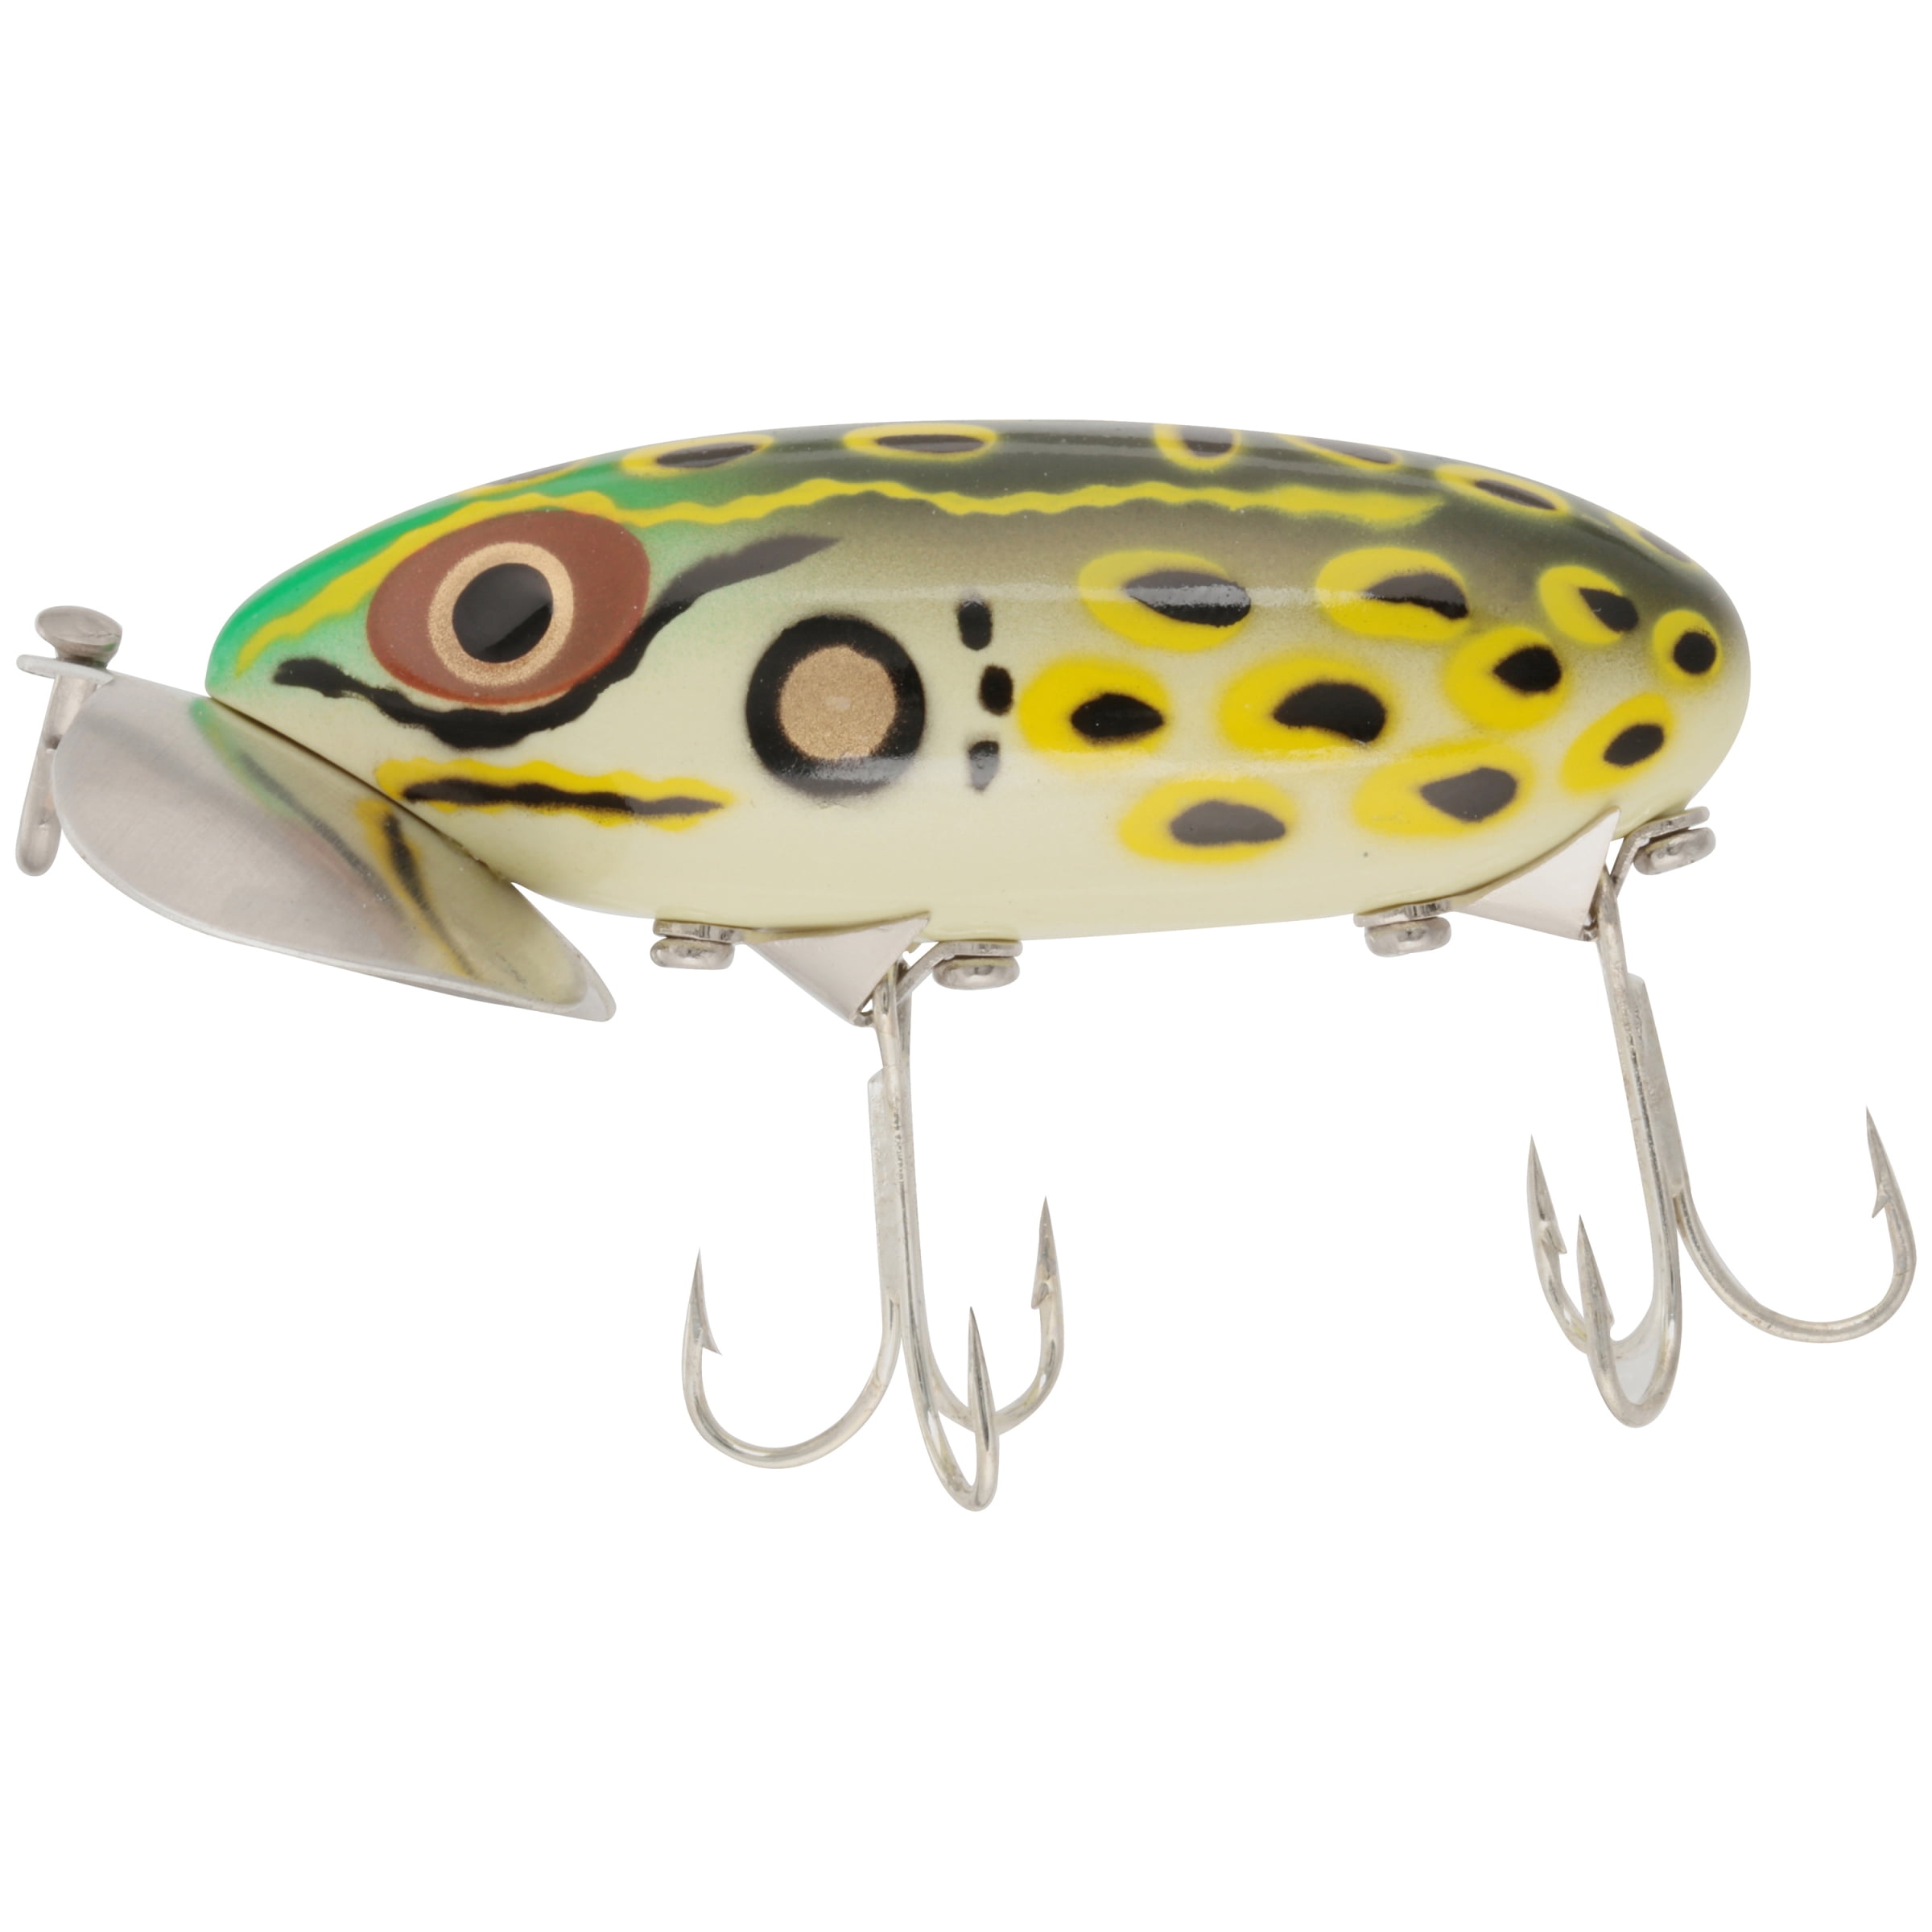 Arbogast Musky Jitterbug In Frog Pattern Fishing Lure 海外 即決 - スキル、知識